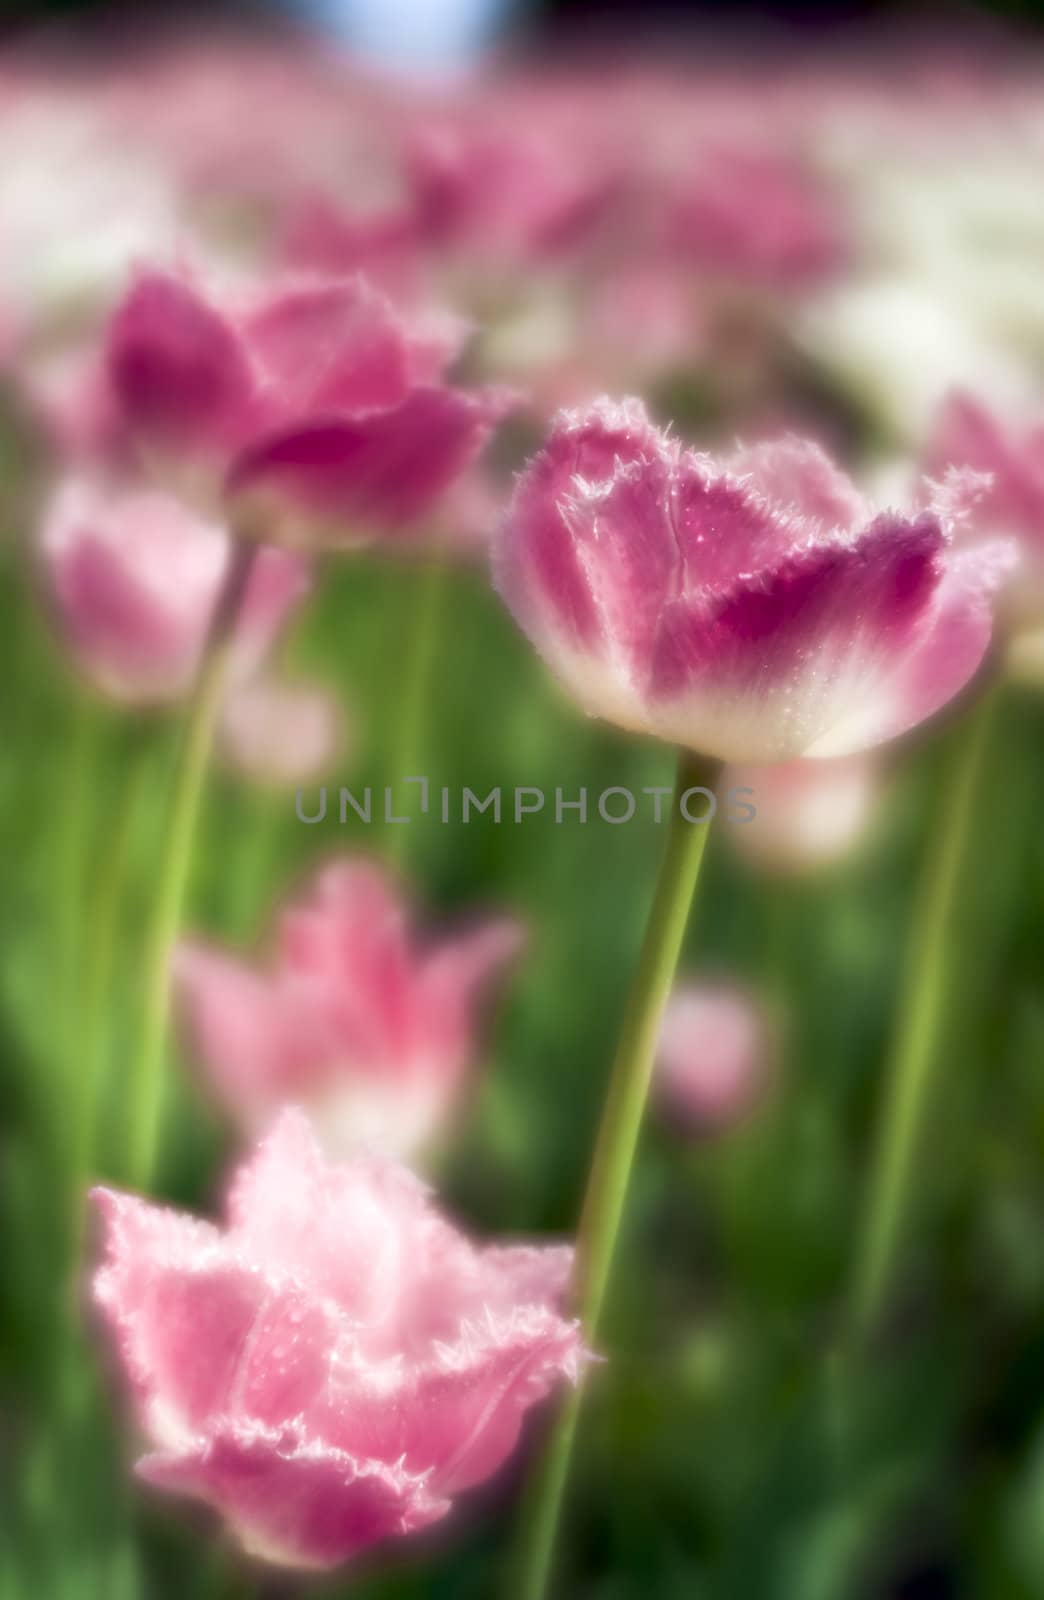 Pink tulips close-up through monocle lens